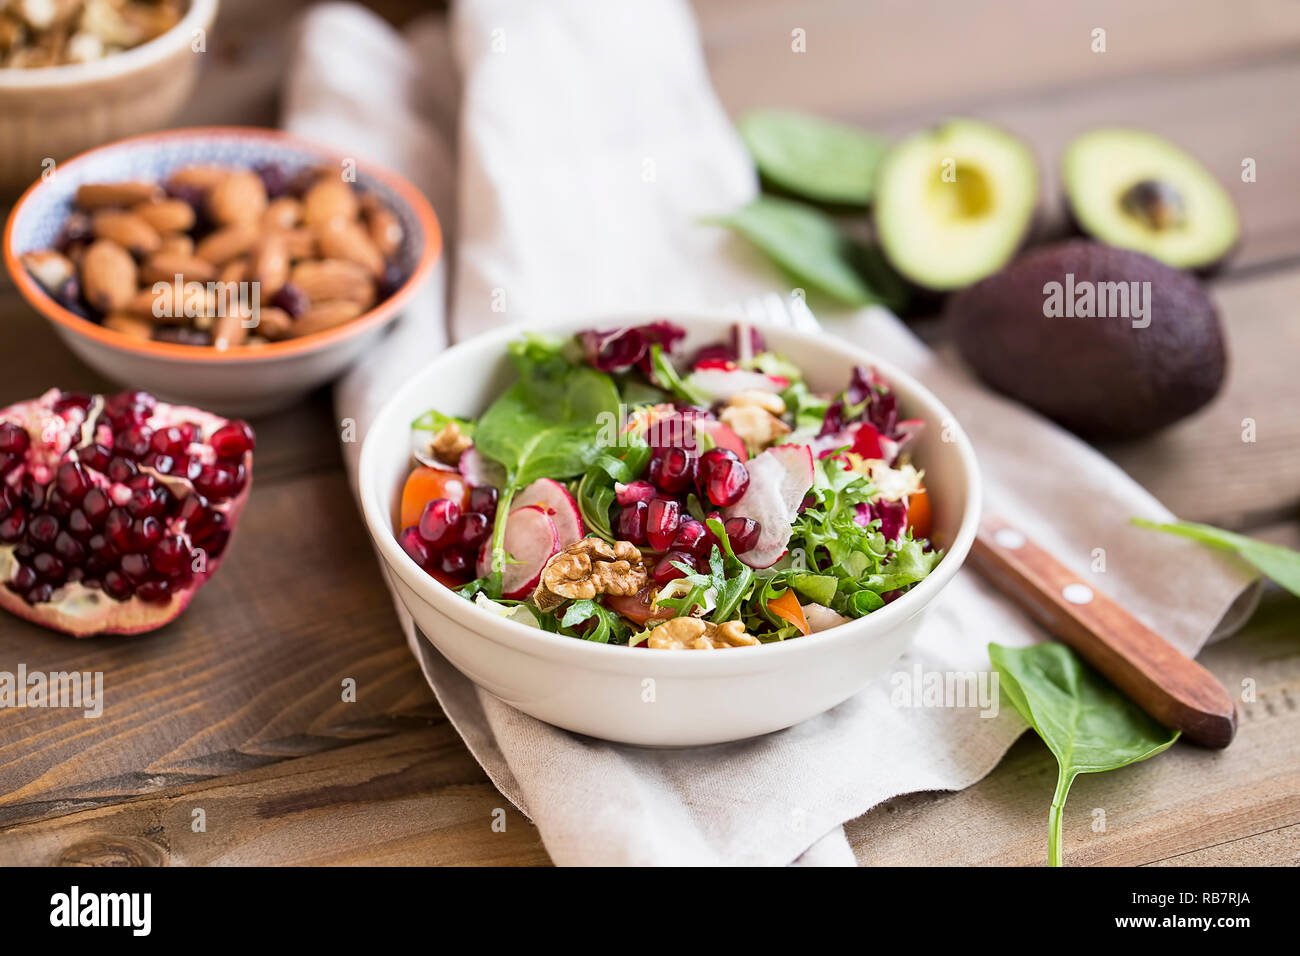 Fresh healthy and oragnaic salad with spinach, arugula leaves, radish, tomatoes, organic nuts and pomegranate seeds. Vegan salad diet concept Stock Photo